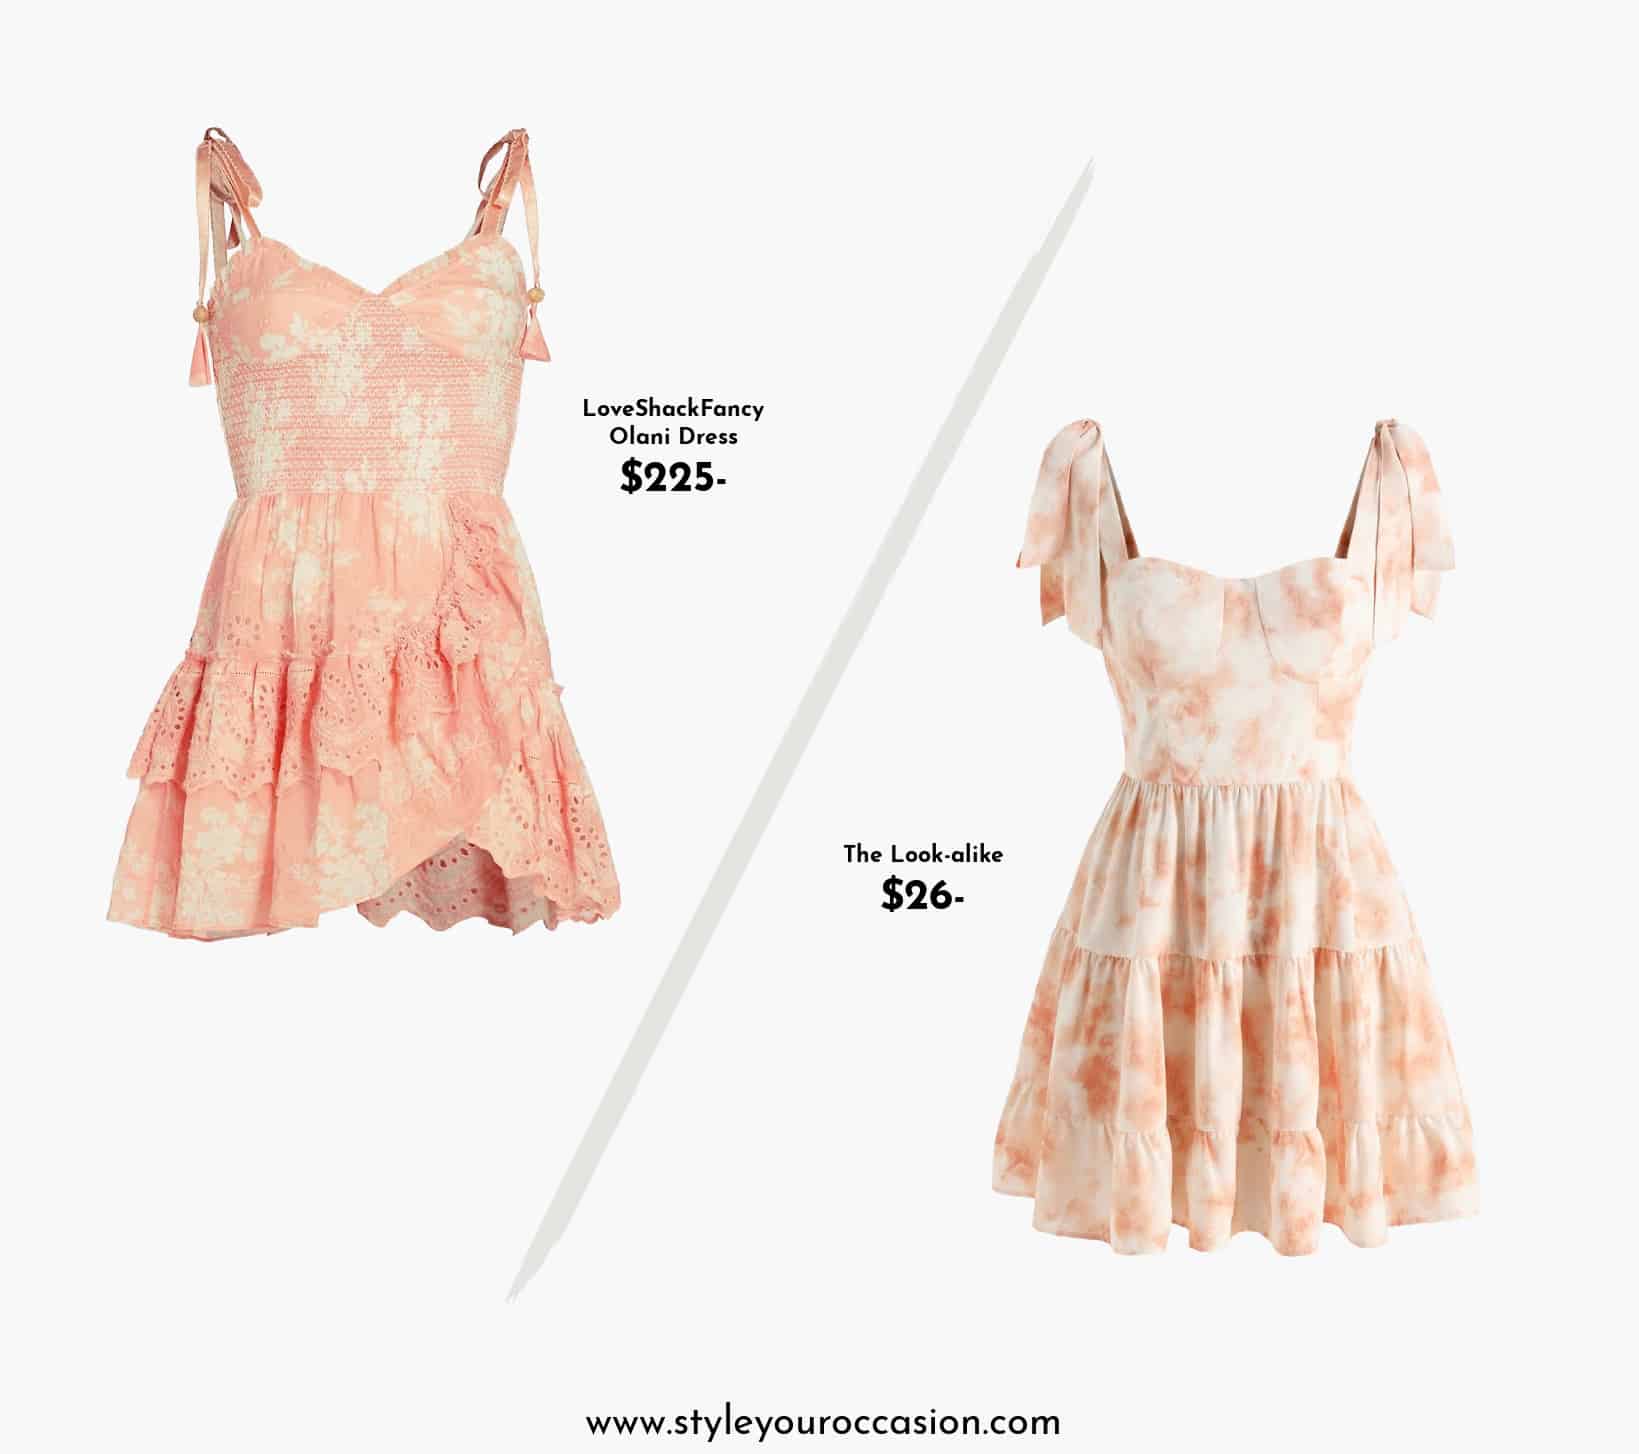 image of two peach floral tiered mini dresses that look alike